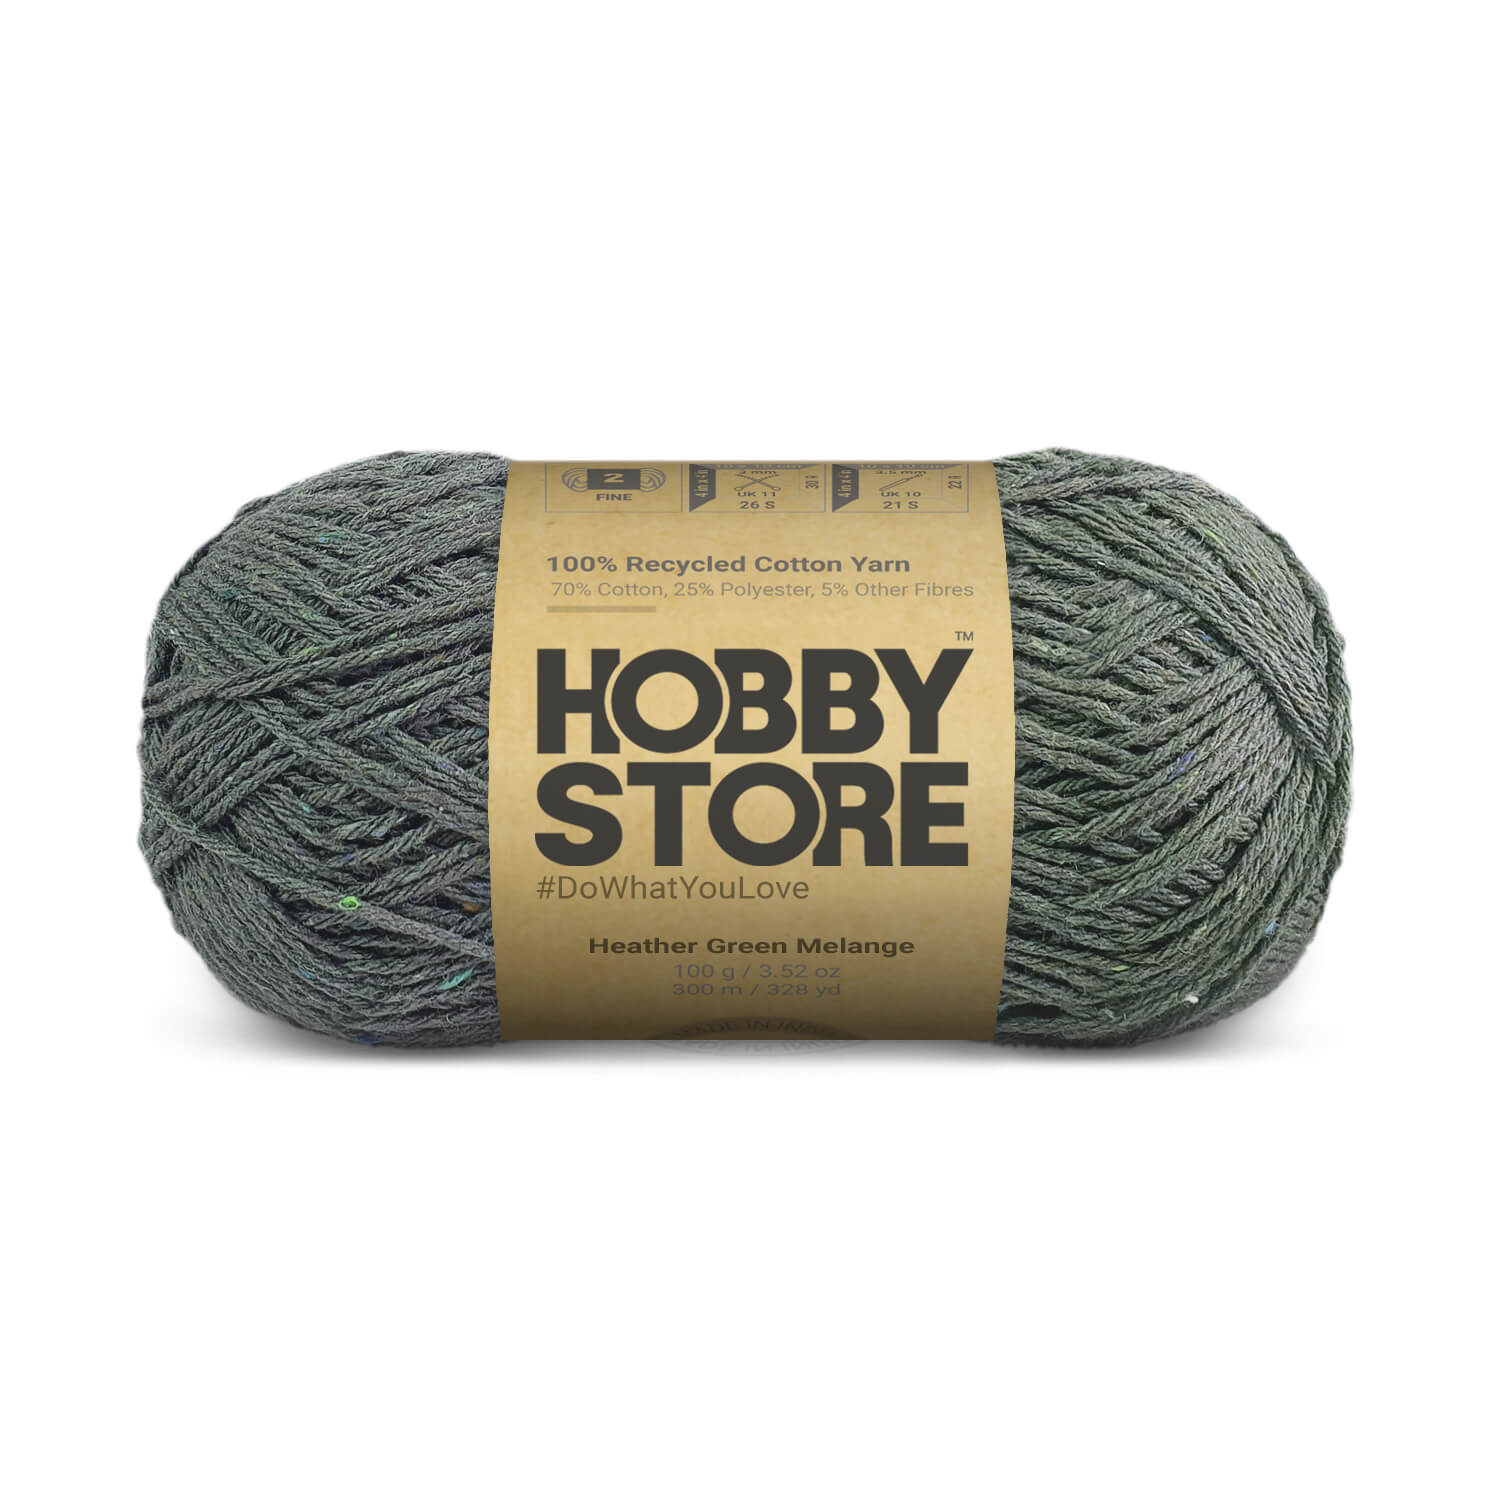 Recycled Cotton Yarn by Hobby Store - Heather Green Melange 8902